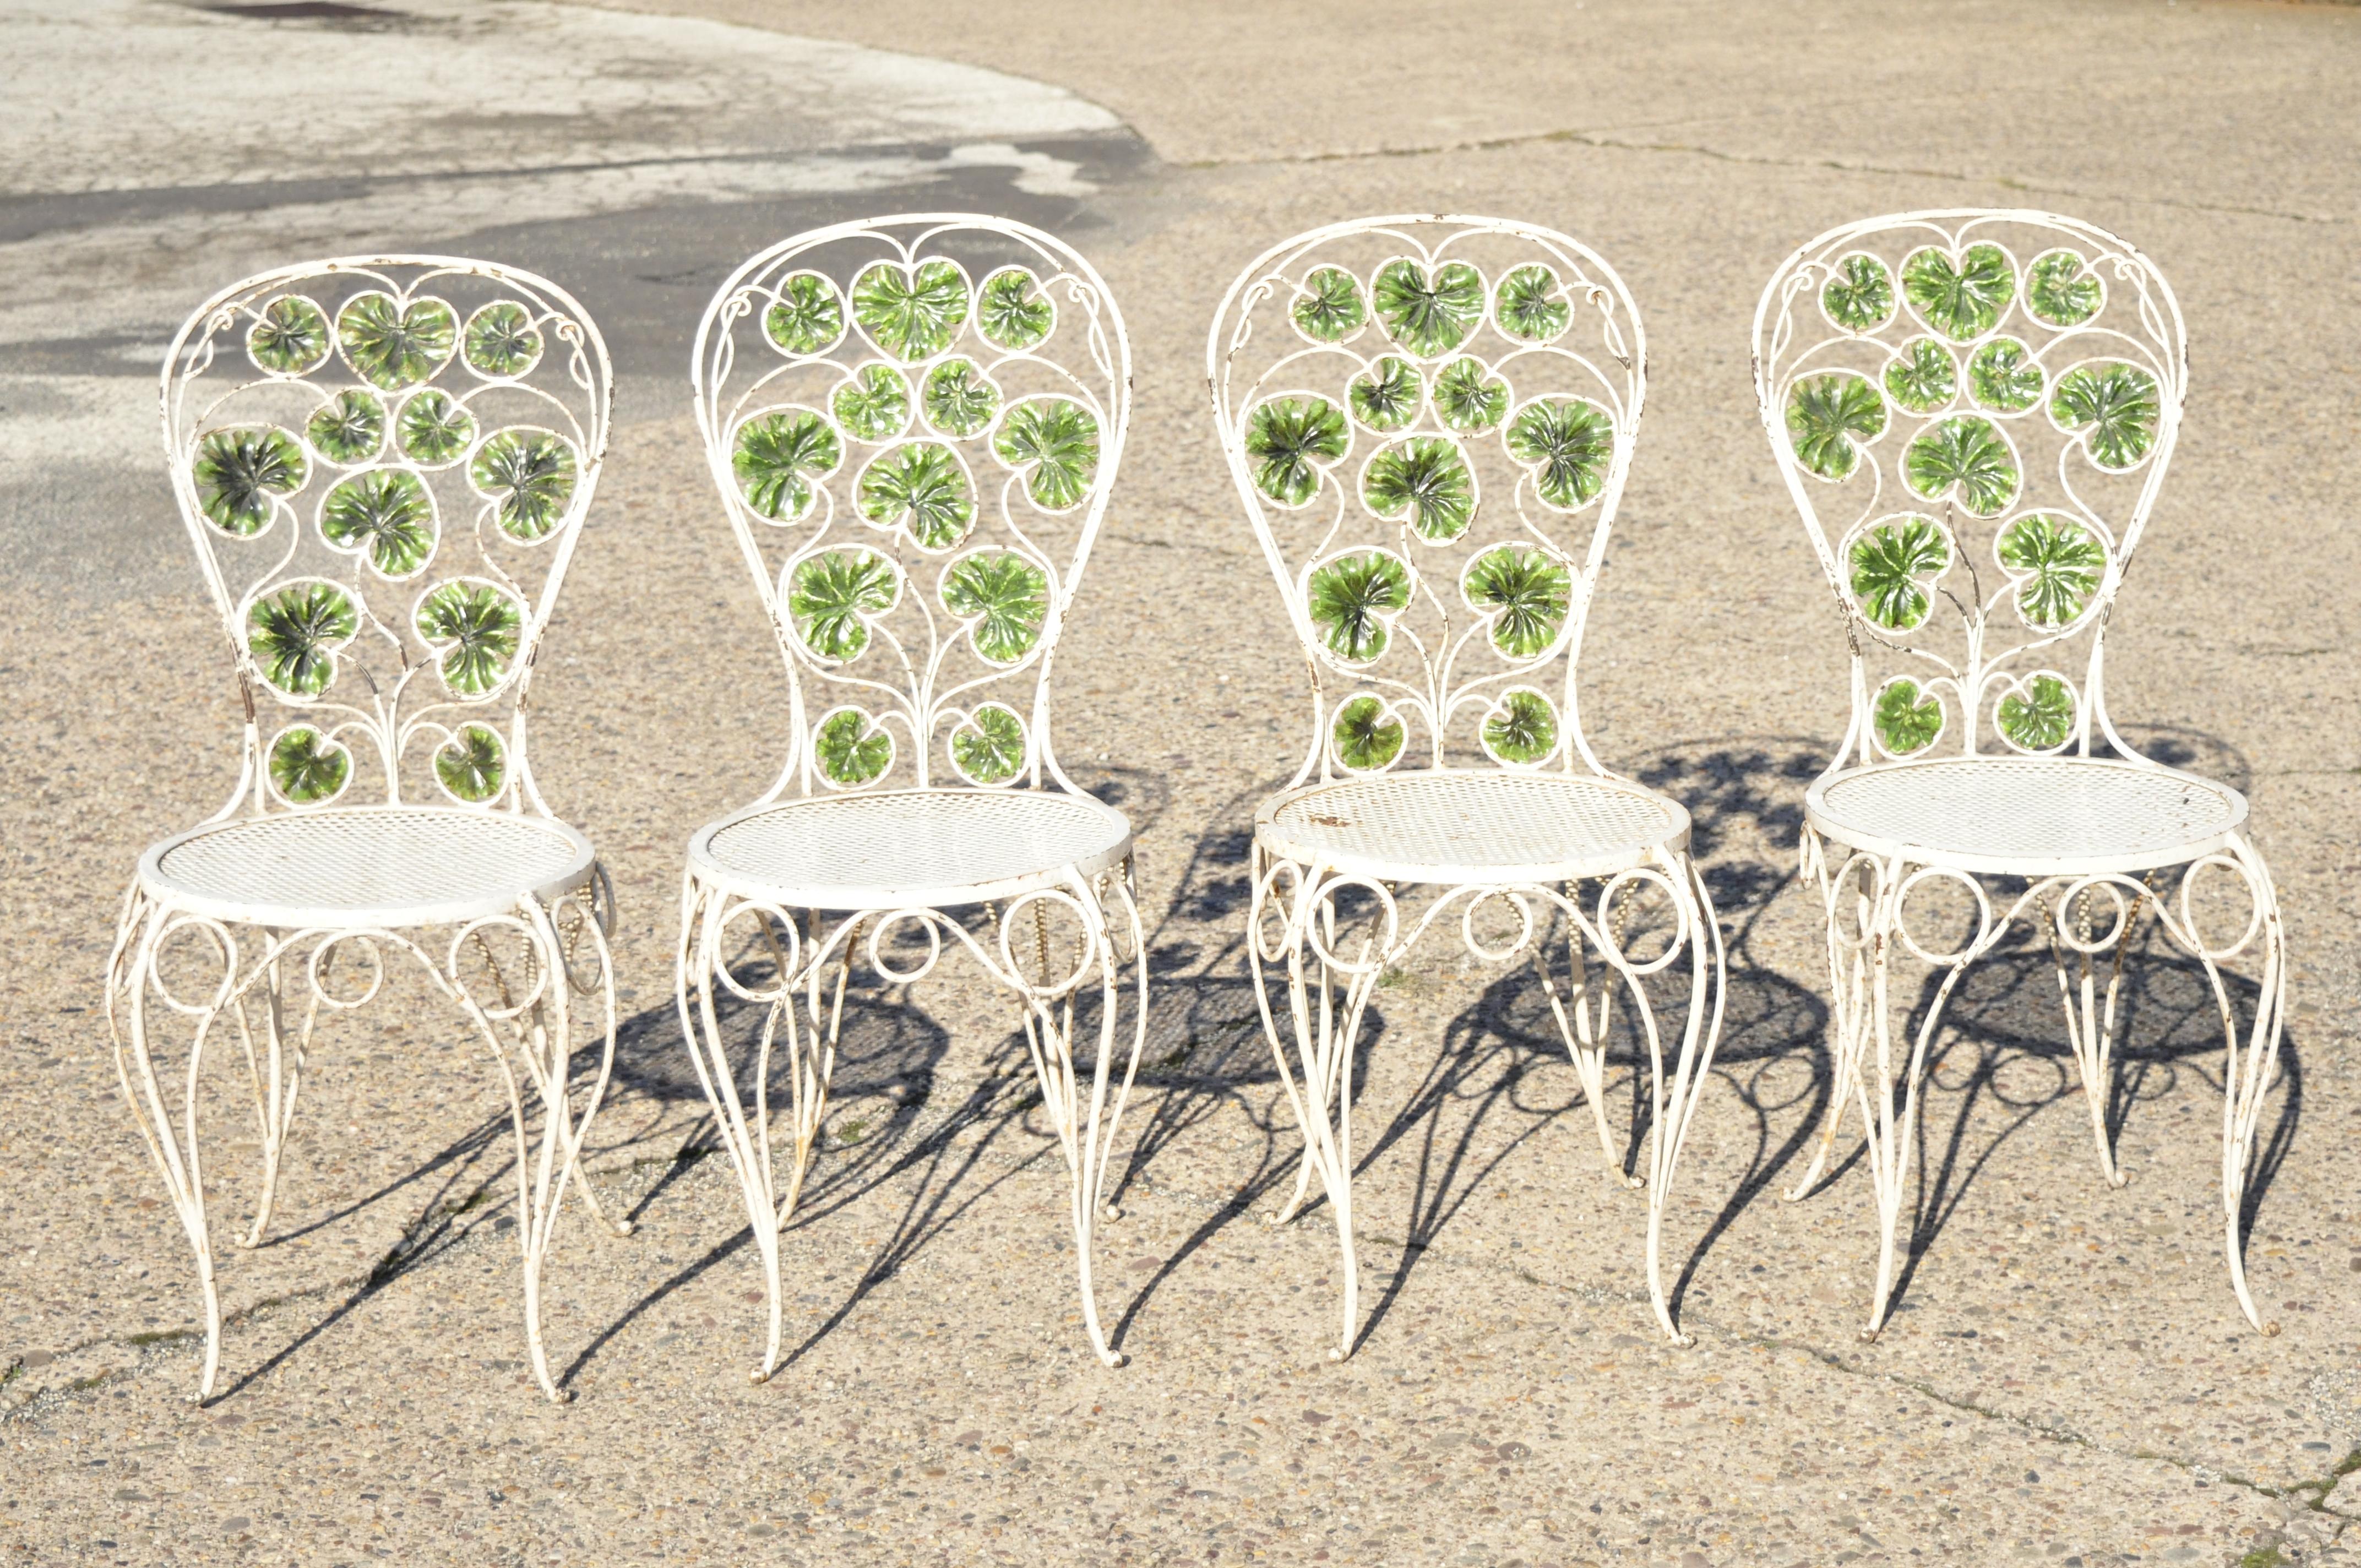 Antique French Art Nouveau Green Flower Maple Leaf Garden Patio Dining Set - 5 Piece Set. Set includes (4) side chairs, (1) dining table, green painted maple leaf frames, shapely legs, ornate flower stretcher base to table, perforated mesh seats,